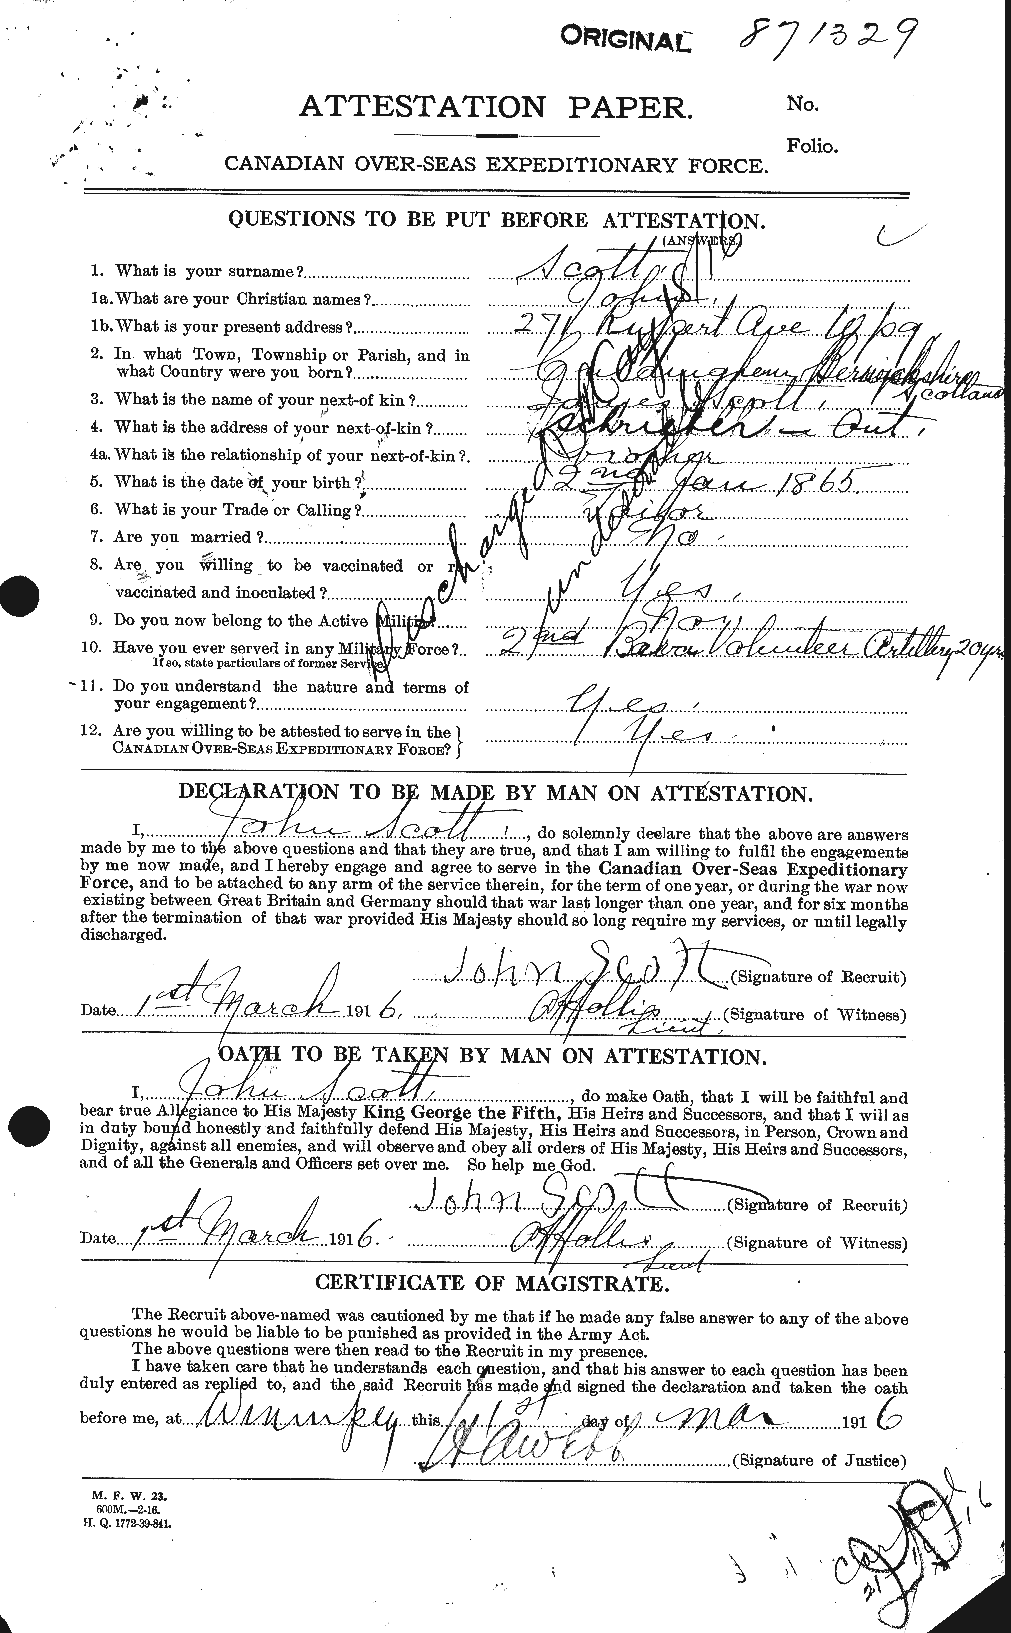 Personnel Records of the First World War - CEF 084936a